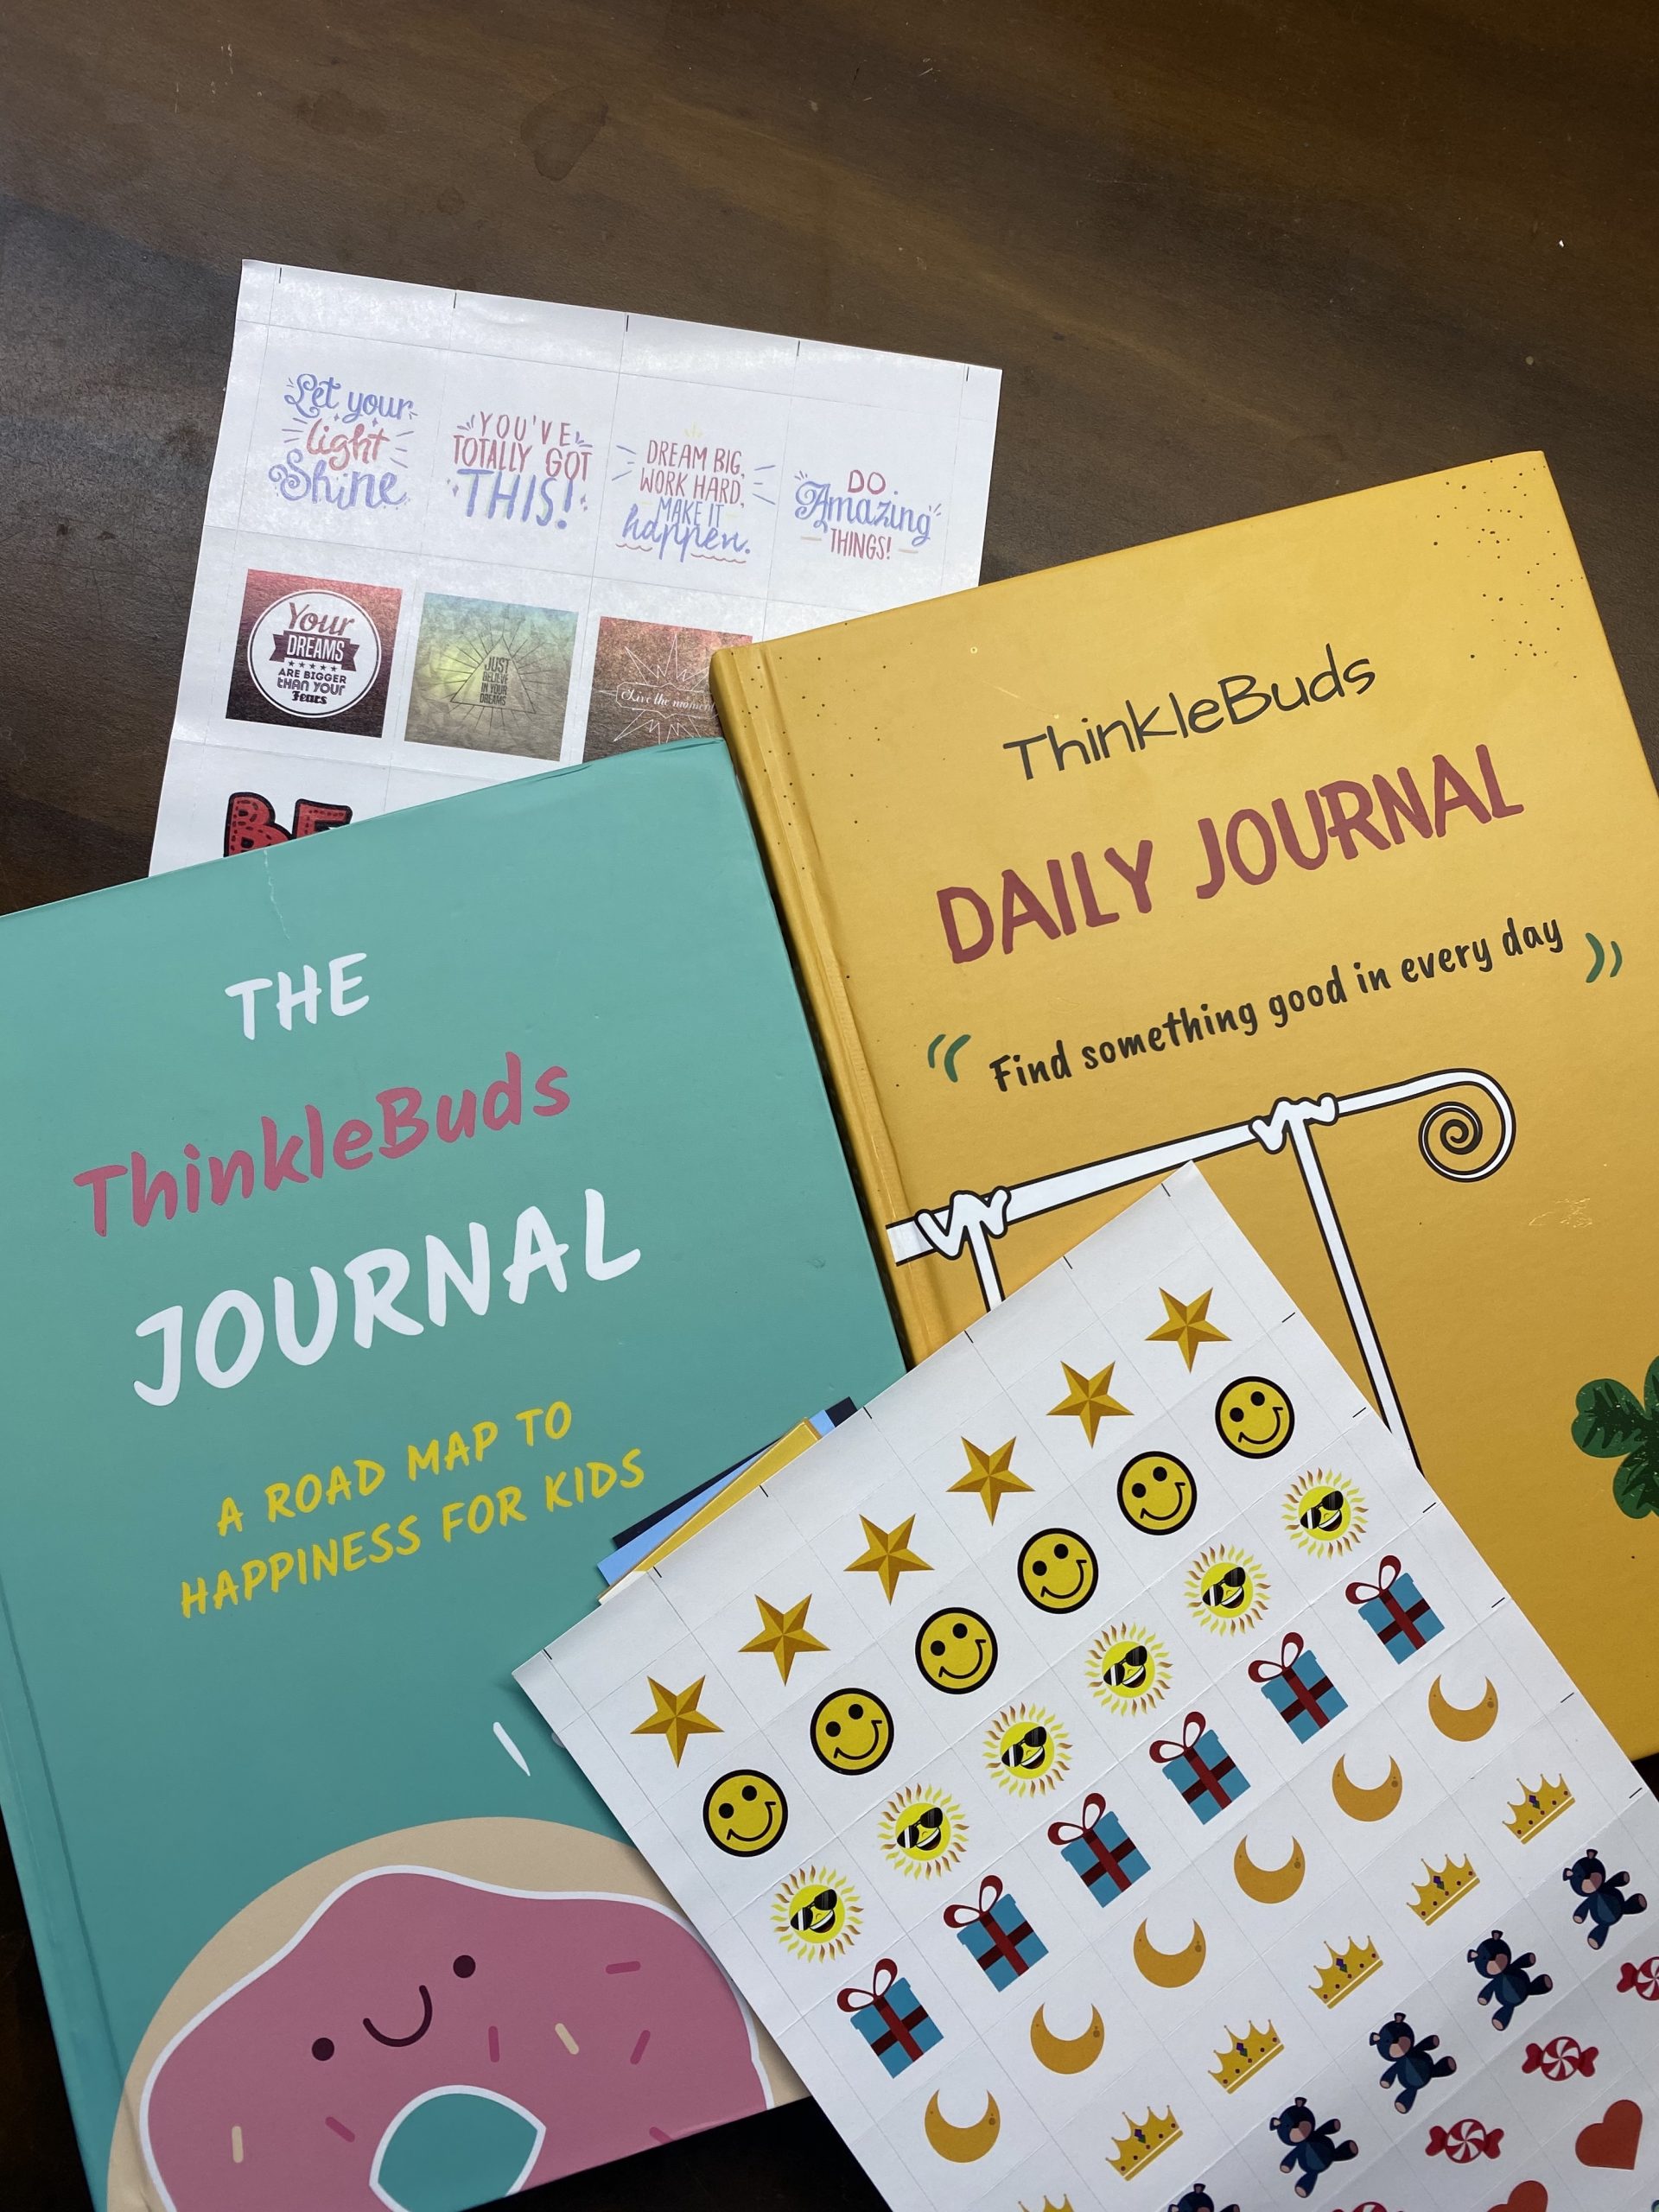 ThinkleBuds- A refreshing new take on developing holistic skills that encompass social-emotional growth as well as life skills